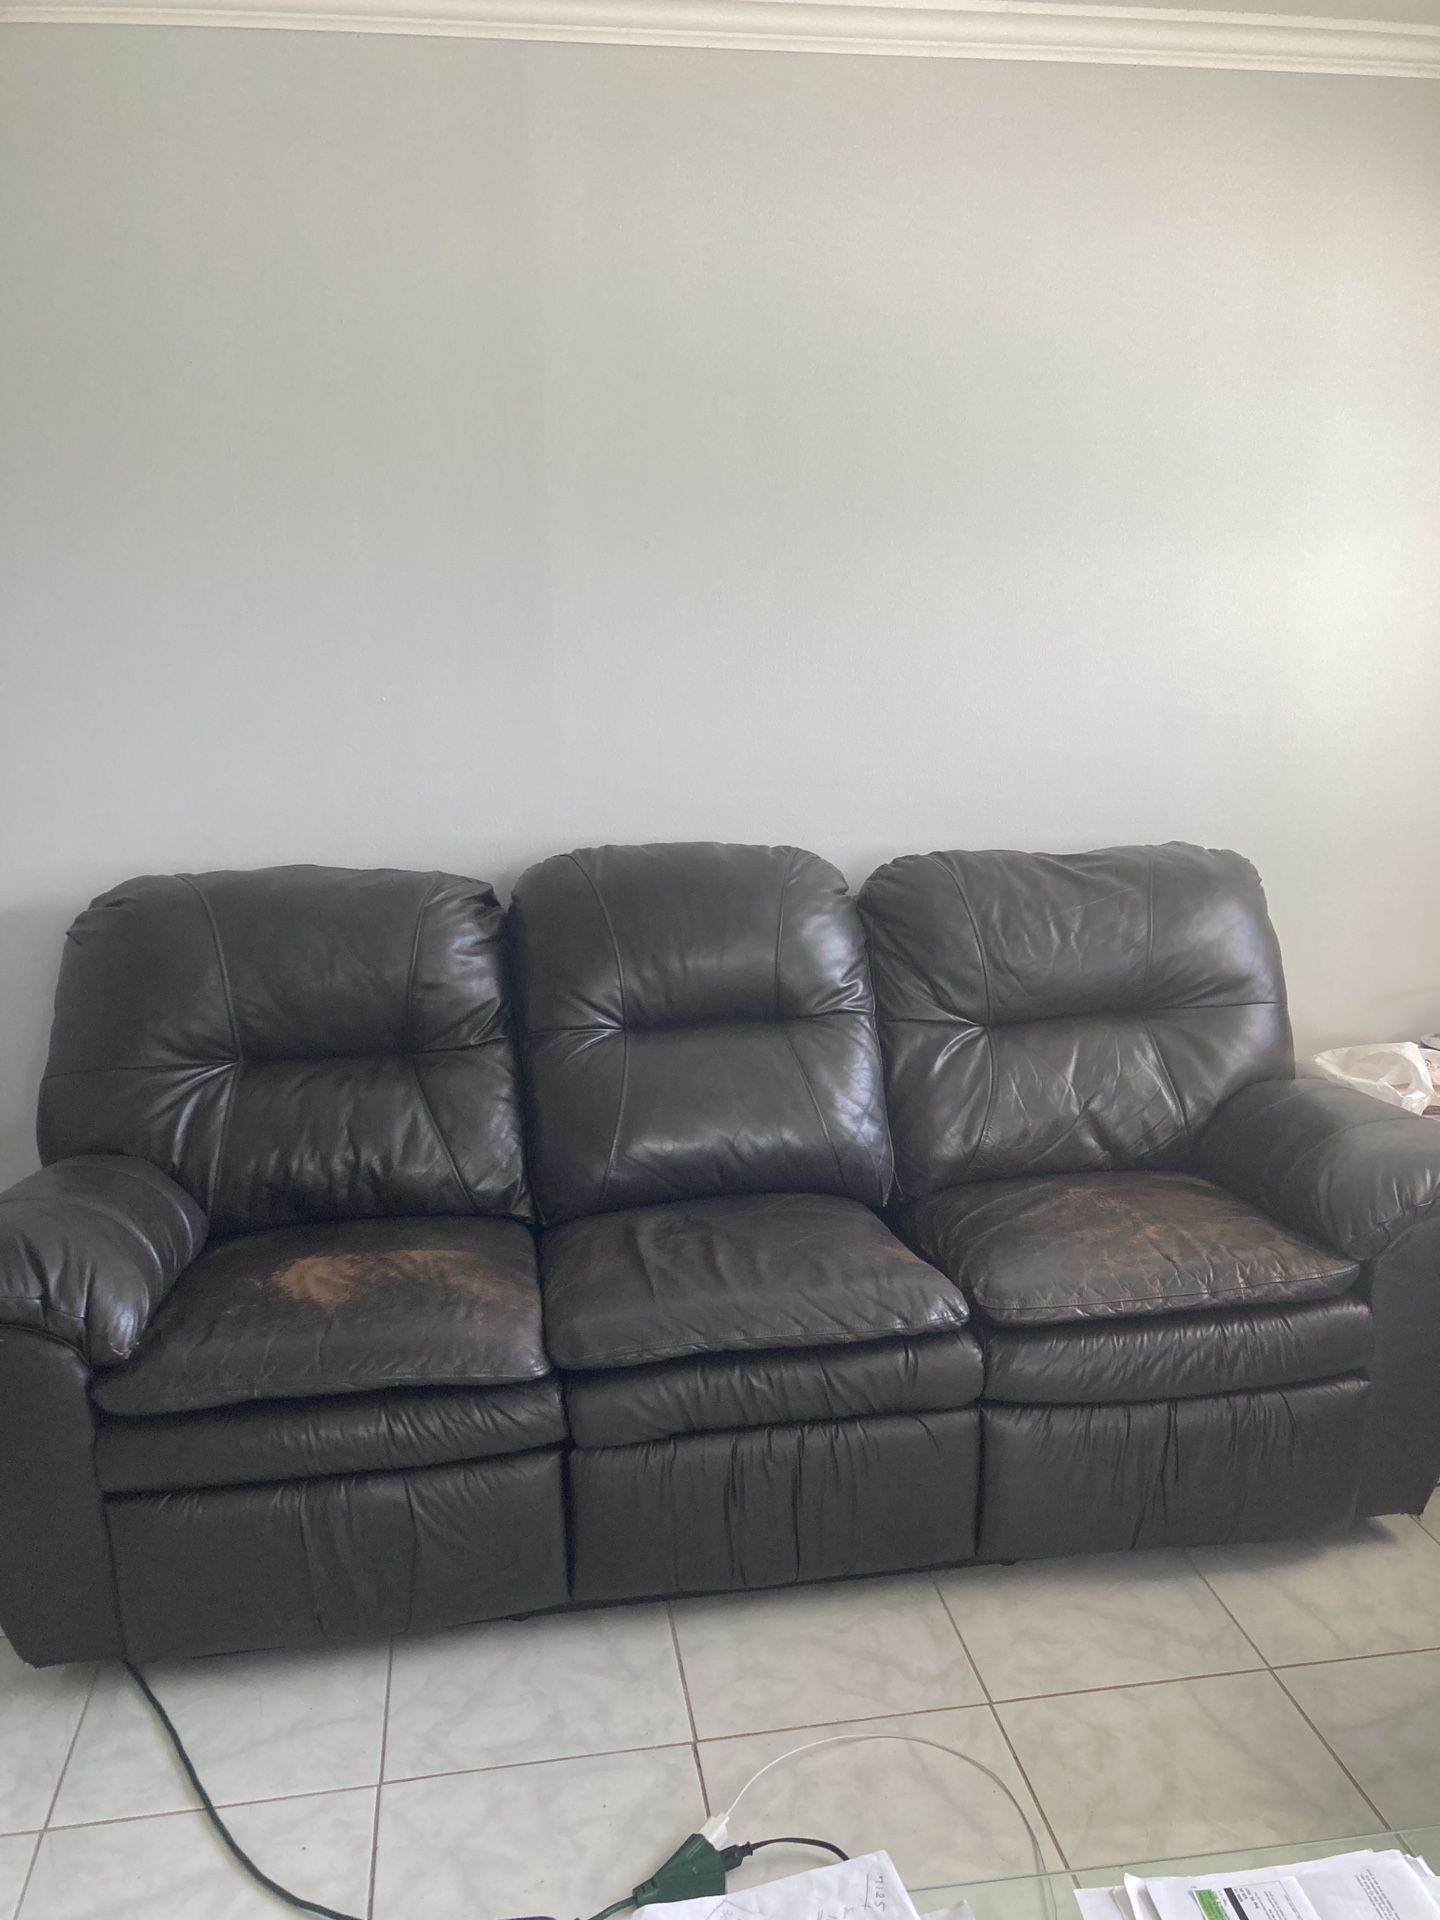 FREE leather Couches (2 Piece) 